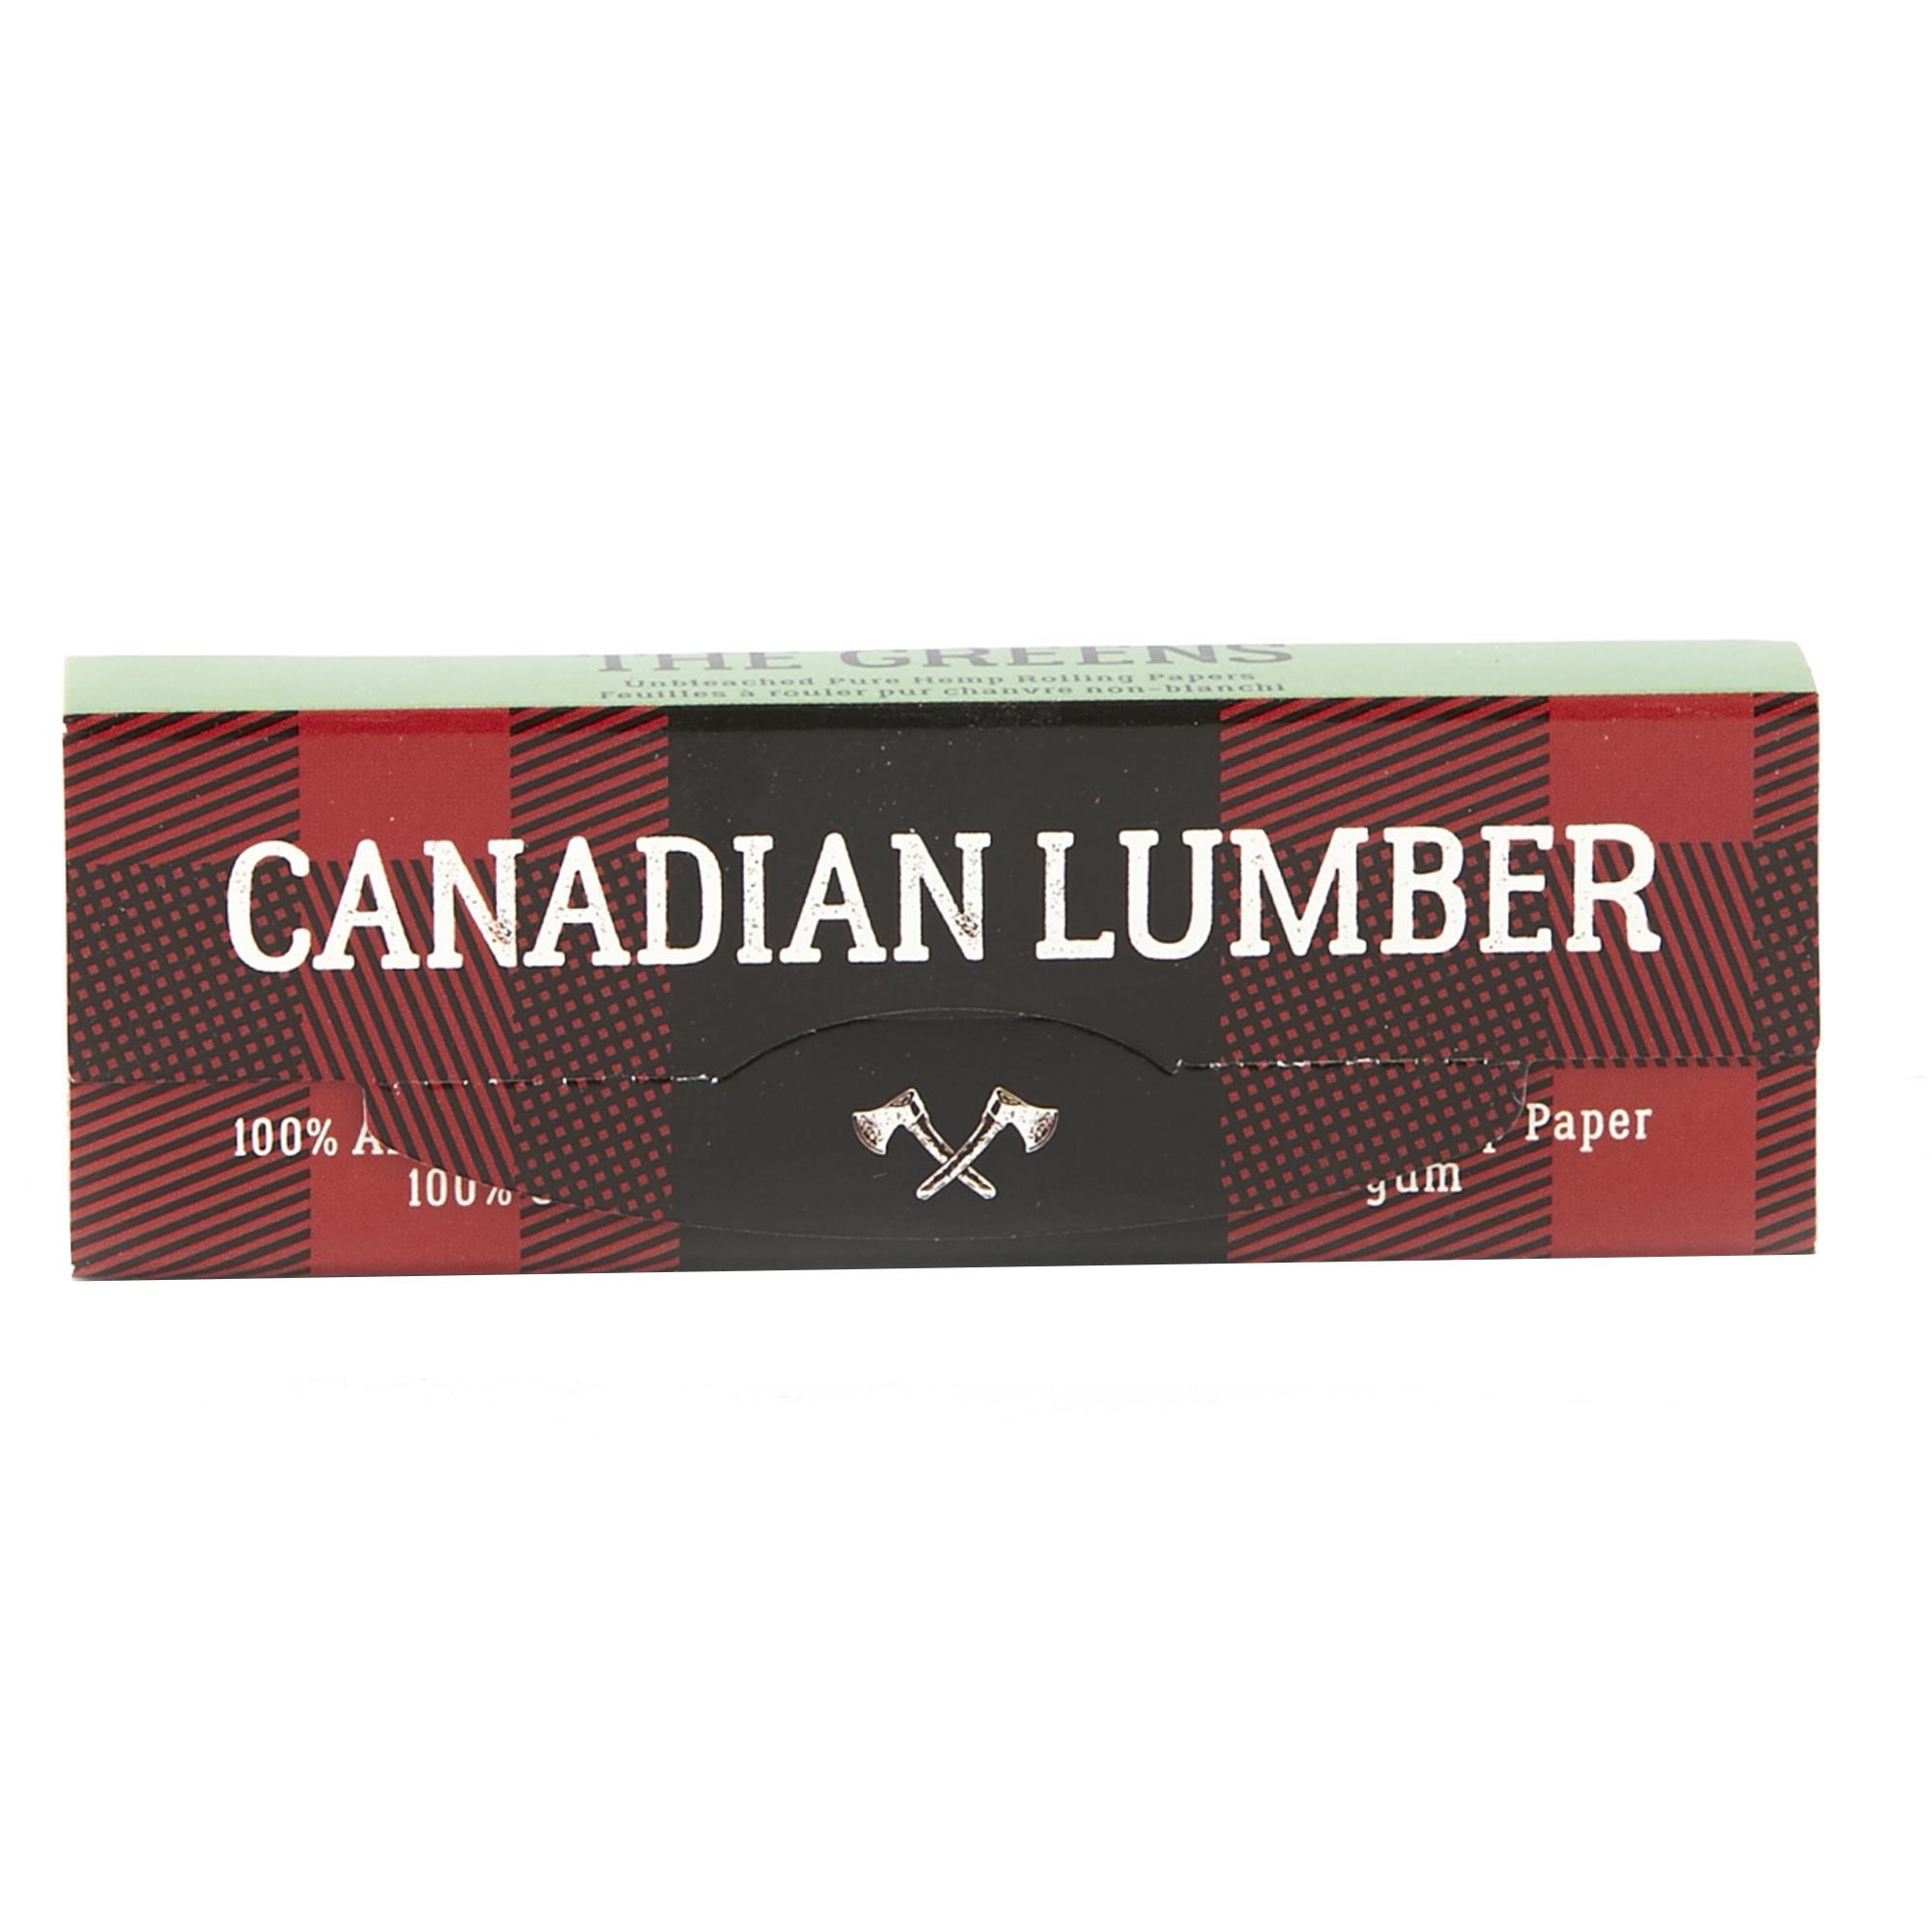 CANADIAN LUMBER THE GREENS